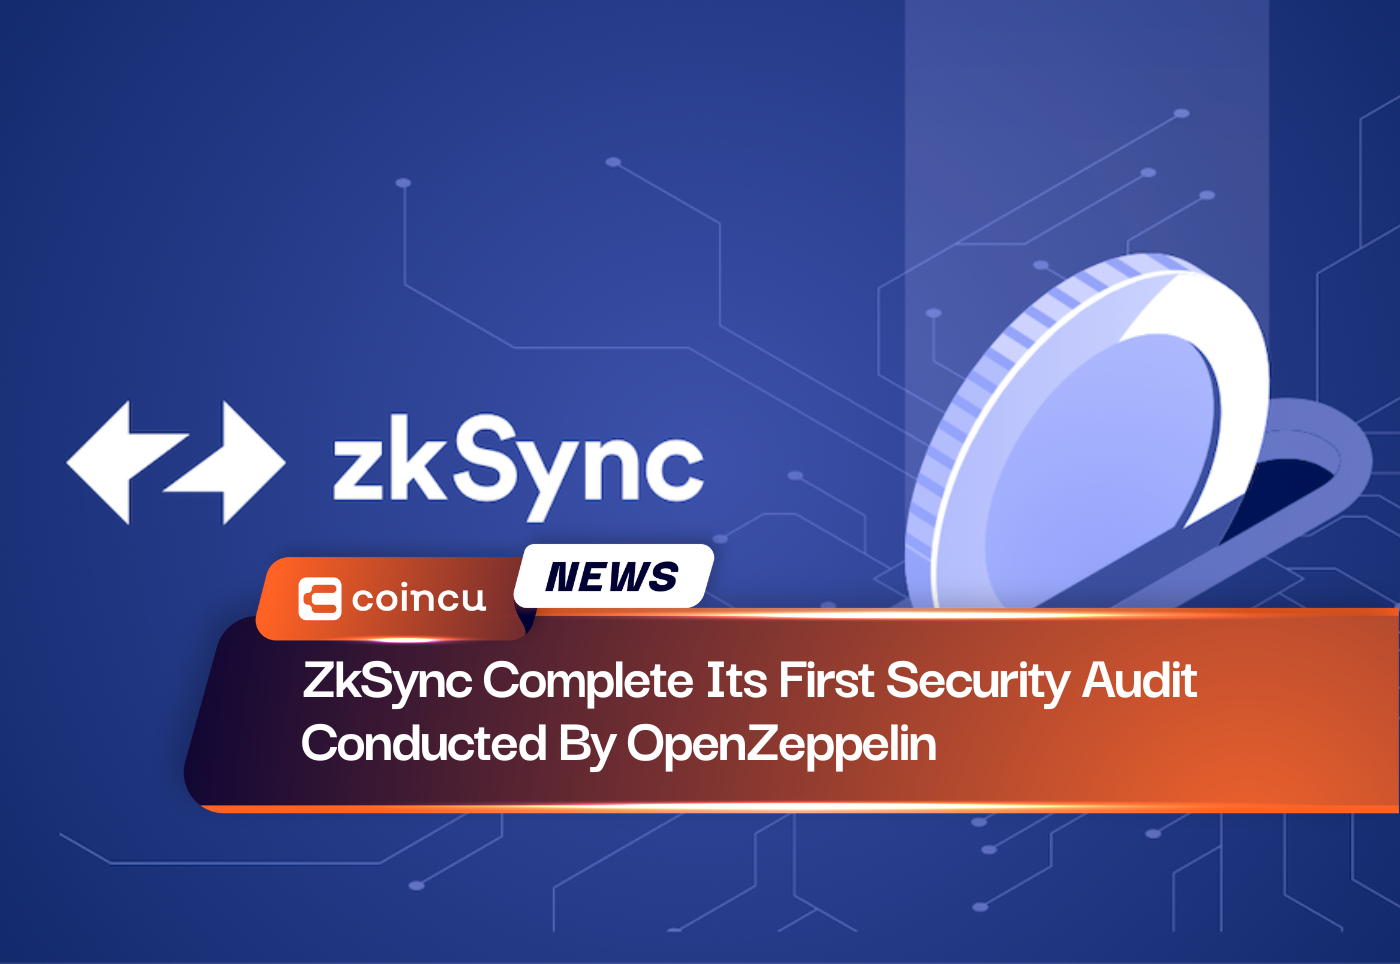 ZkSync Complete Its First Security Audit Conducted By OpenZeppelin